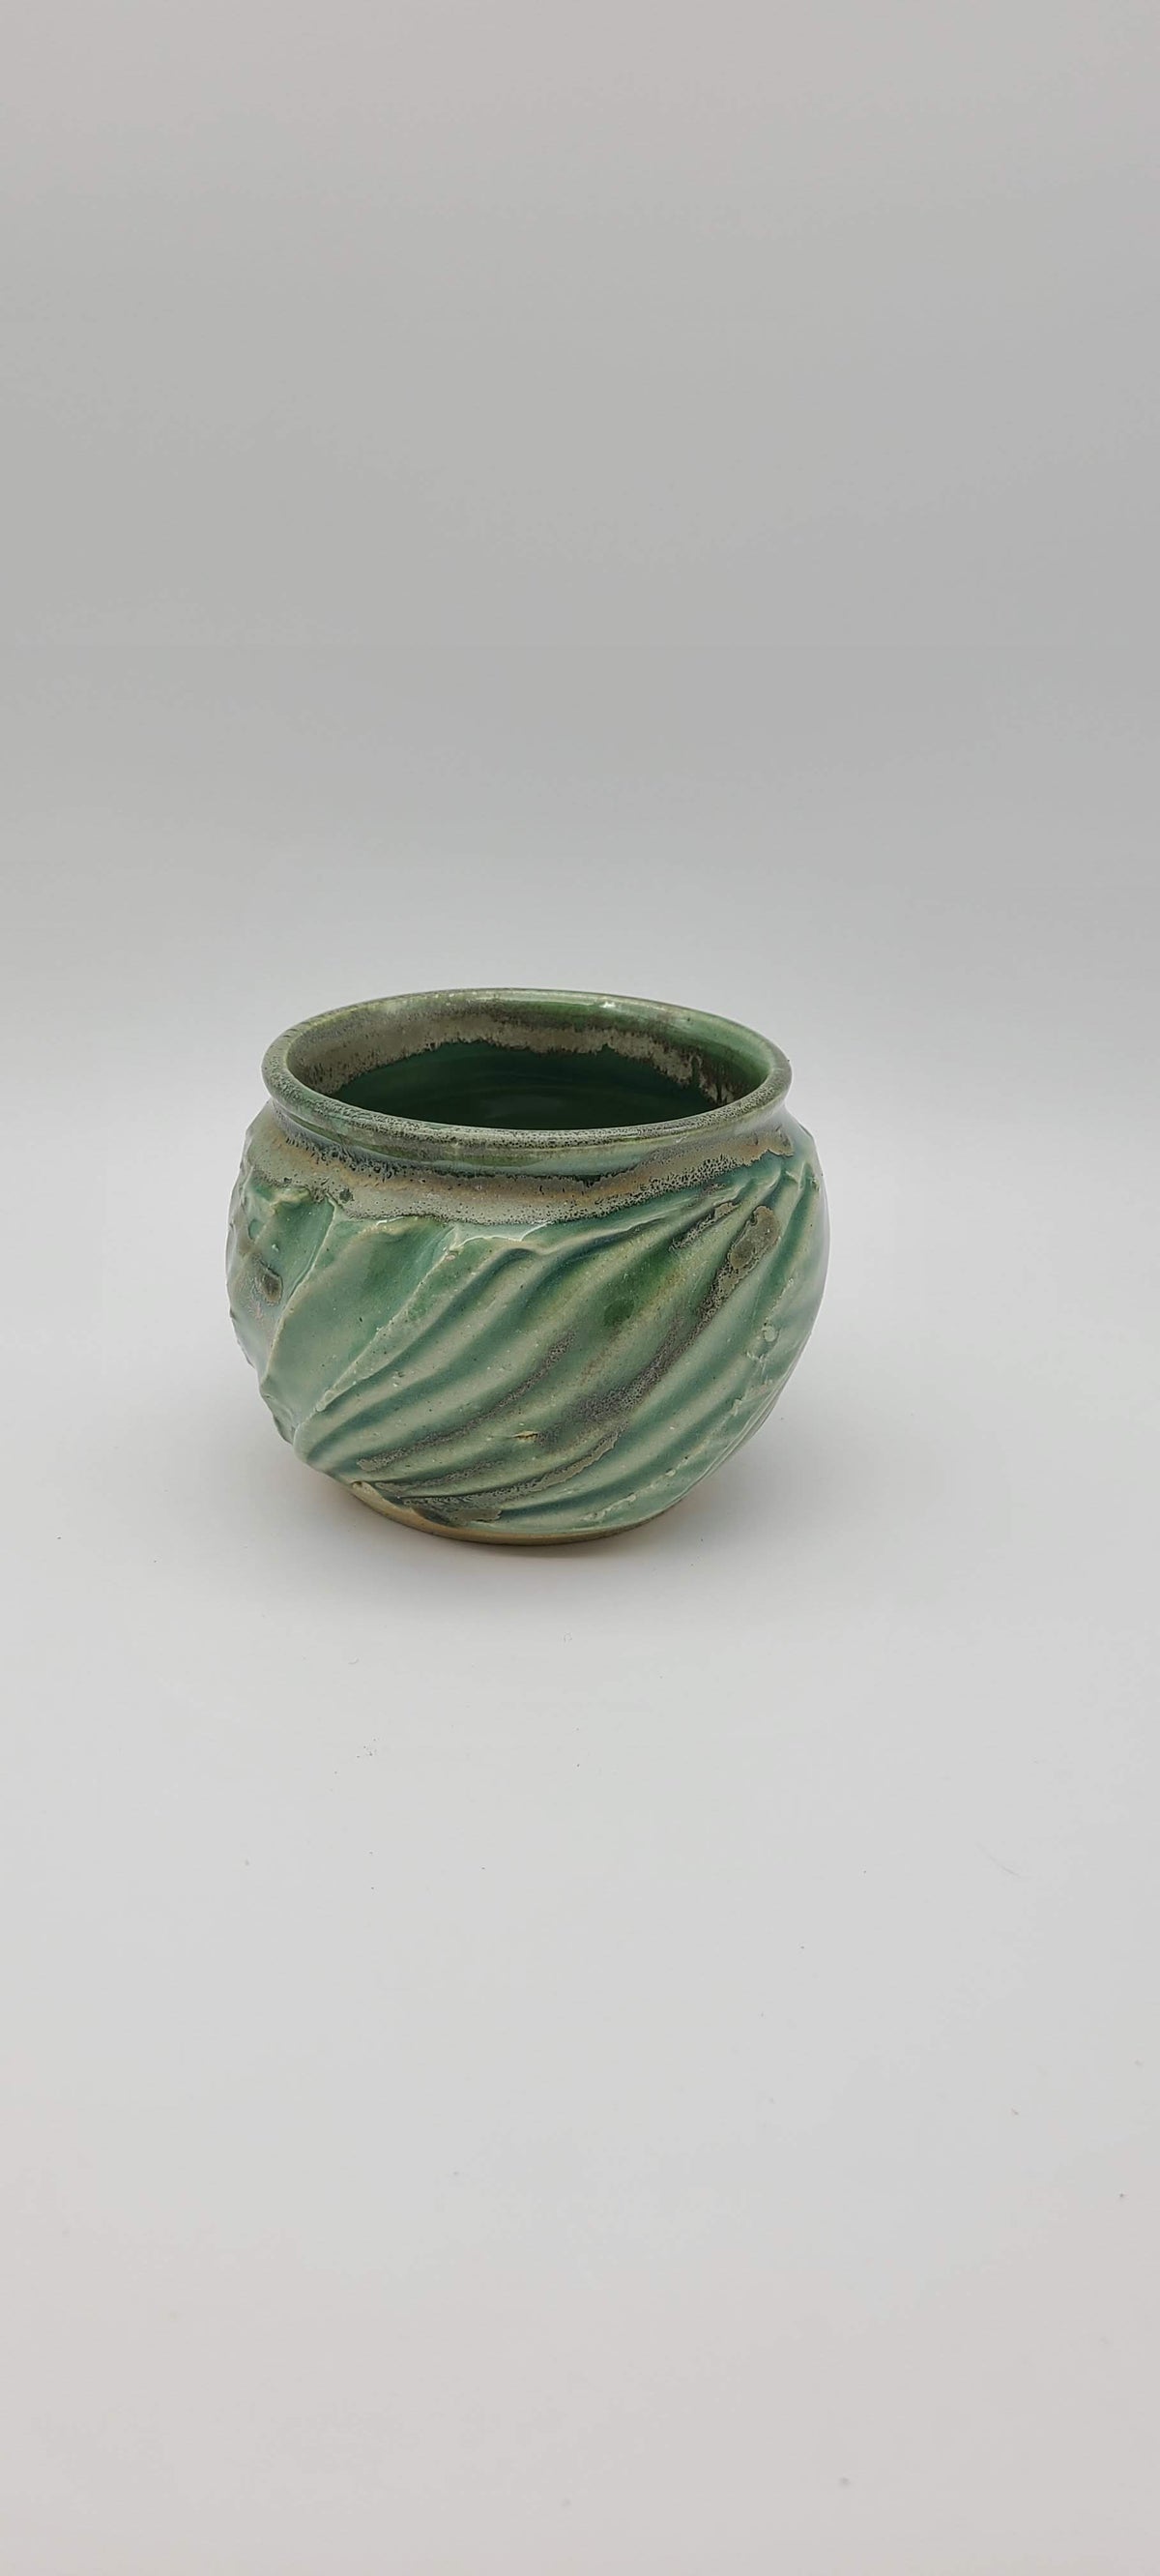 Small Handmade Pottery Bowls - Reflection and Ripples